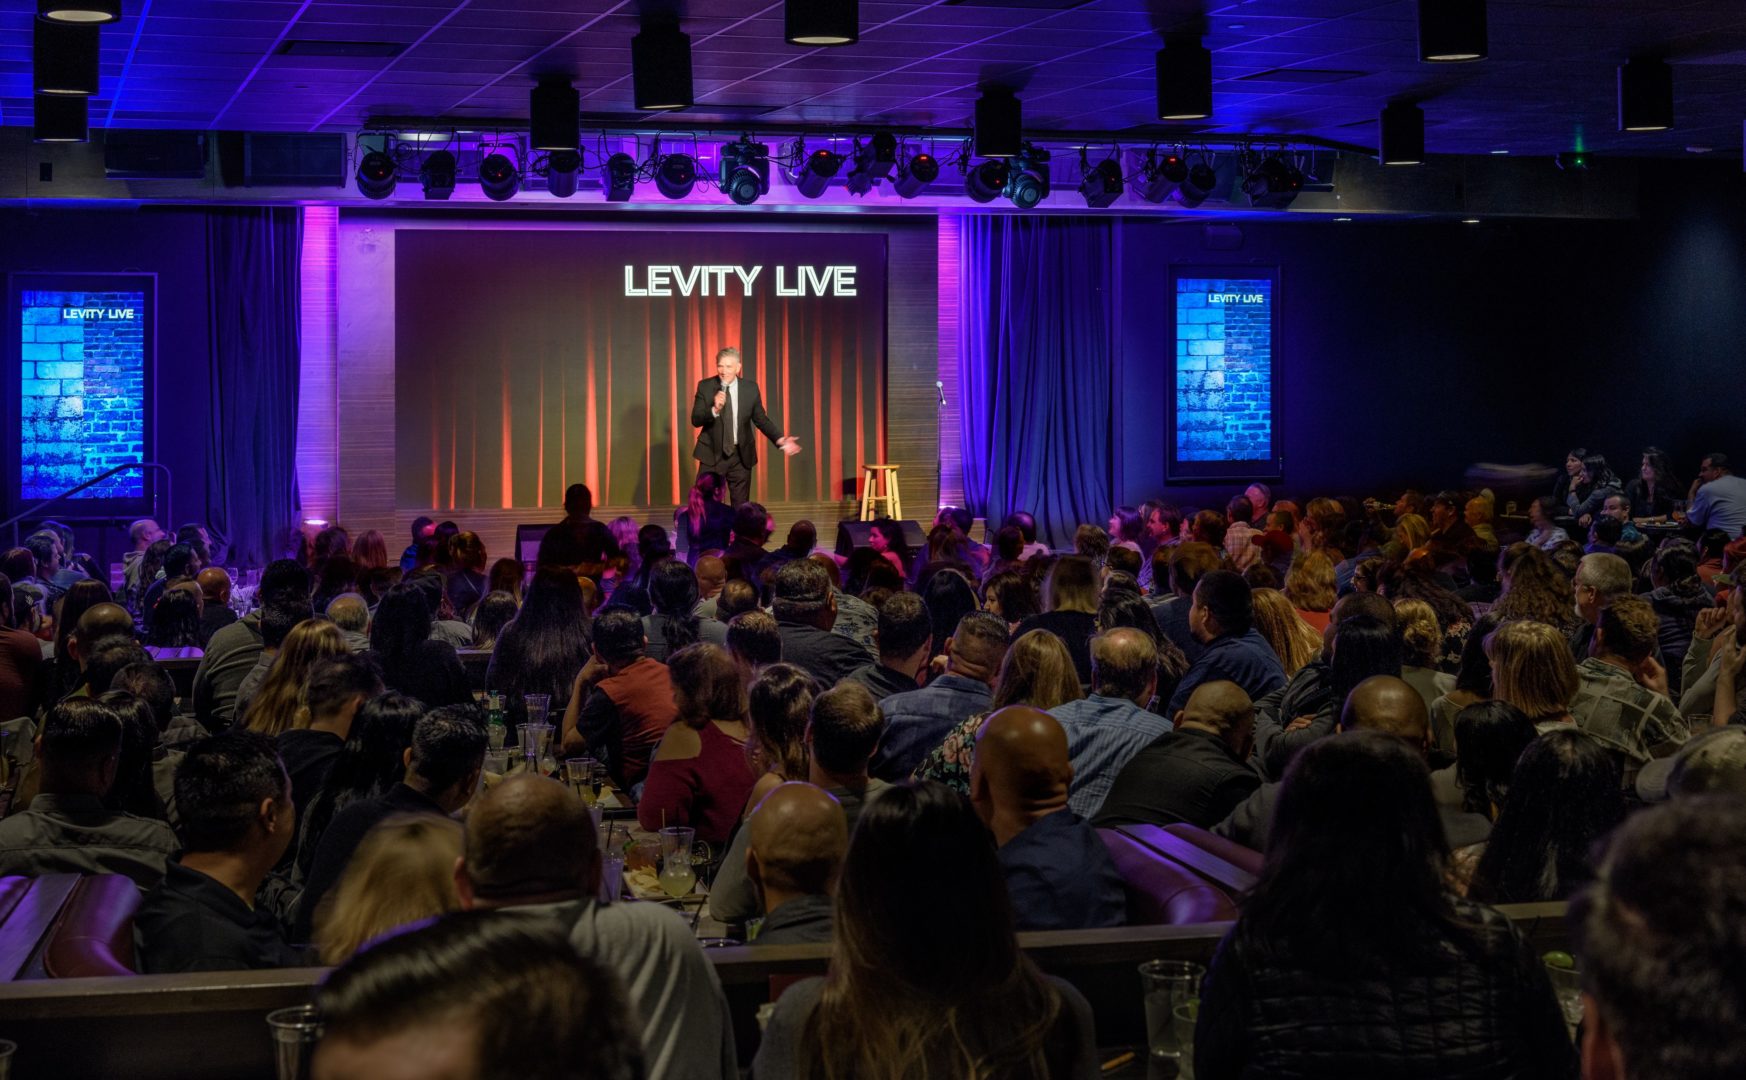 Good Vibes and Good Laughs at Levity Live Comedy Club in Oxnard.